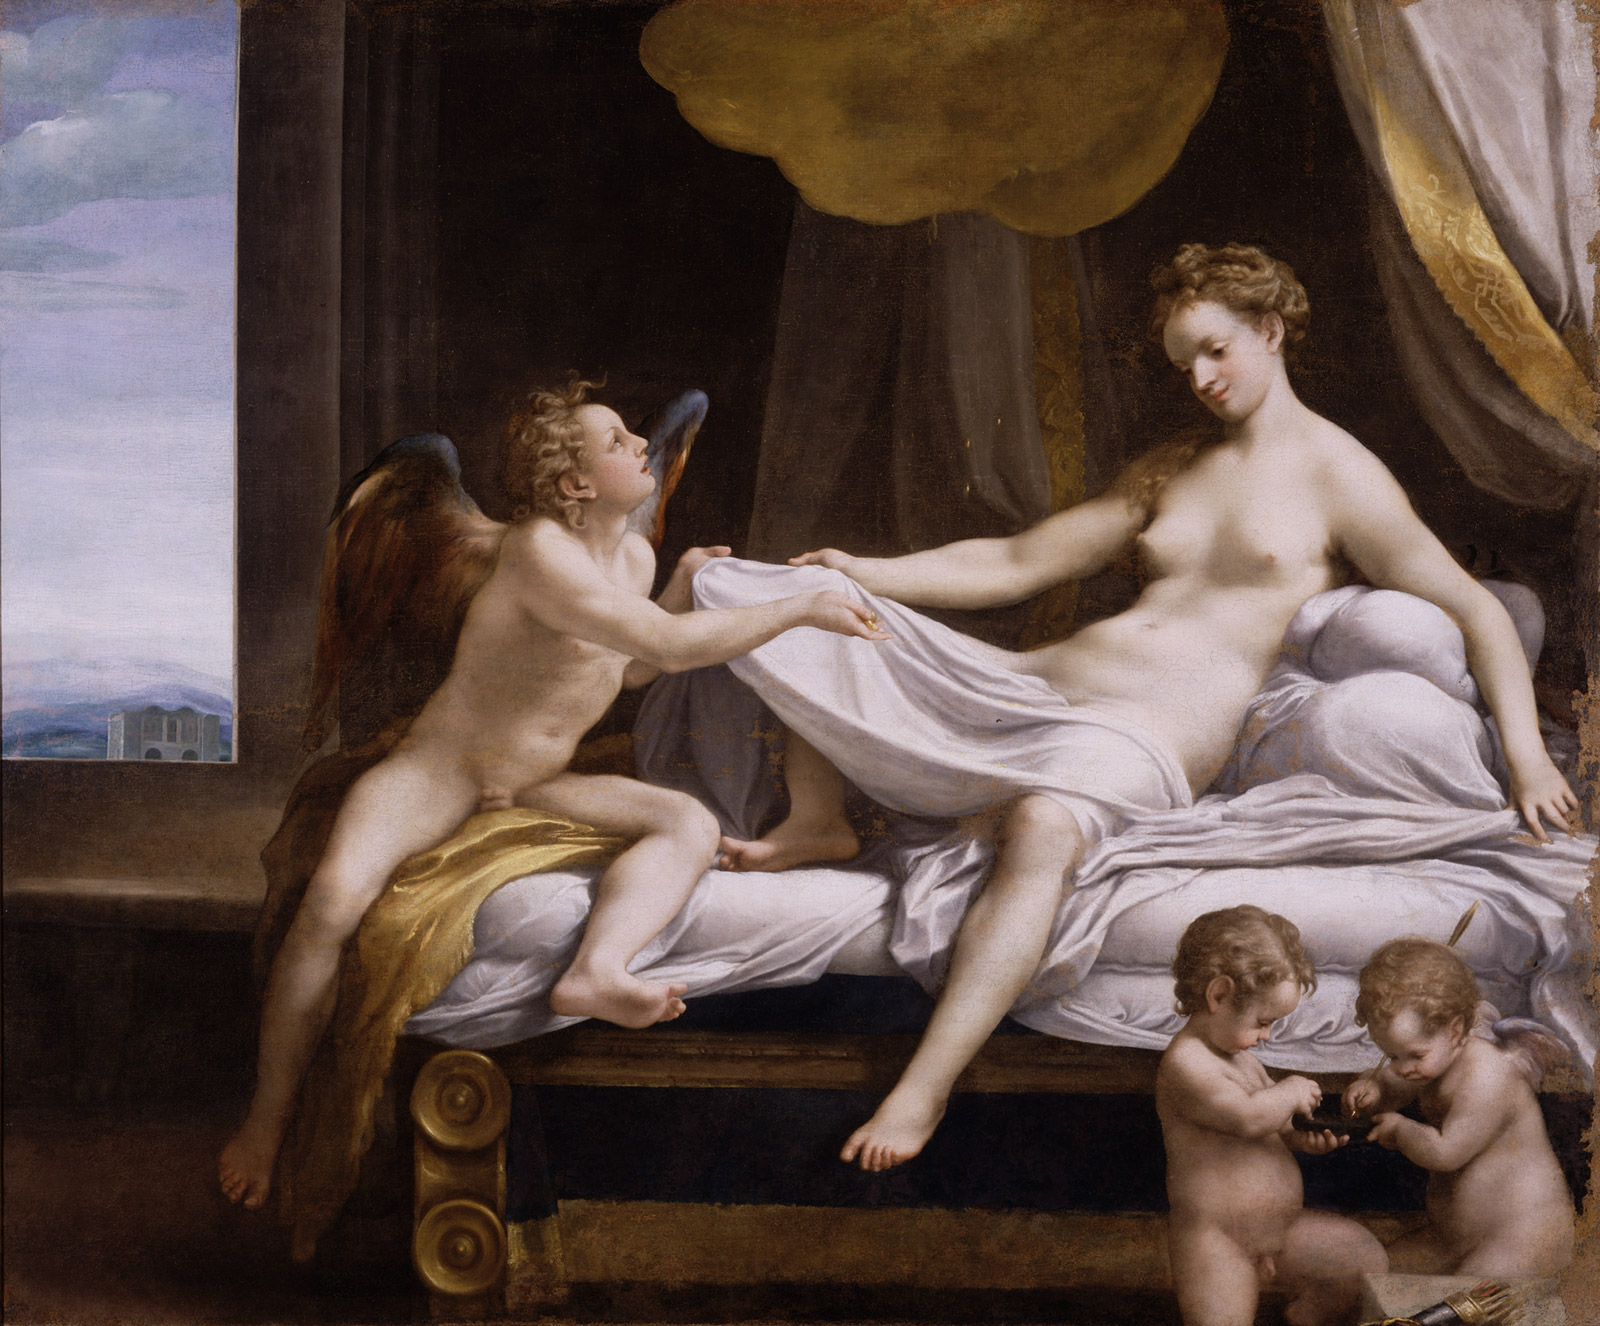 17th Century Nude Porn - Smarthistory â€“ Sex, Power, and Violence in the Renaissance Nude